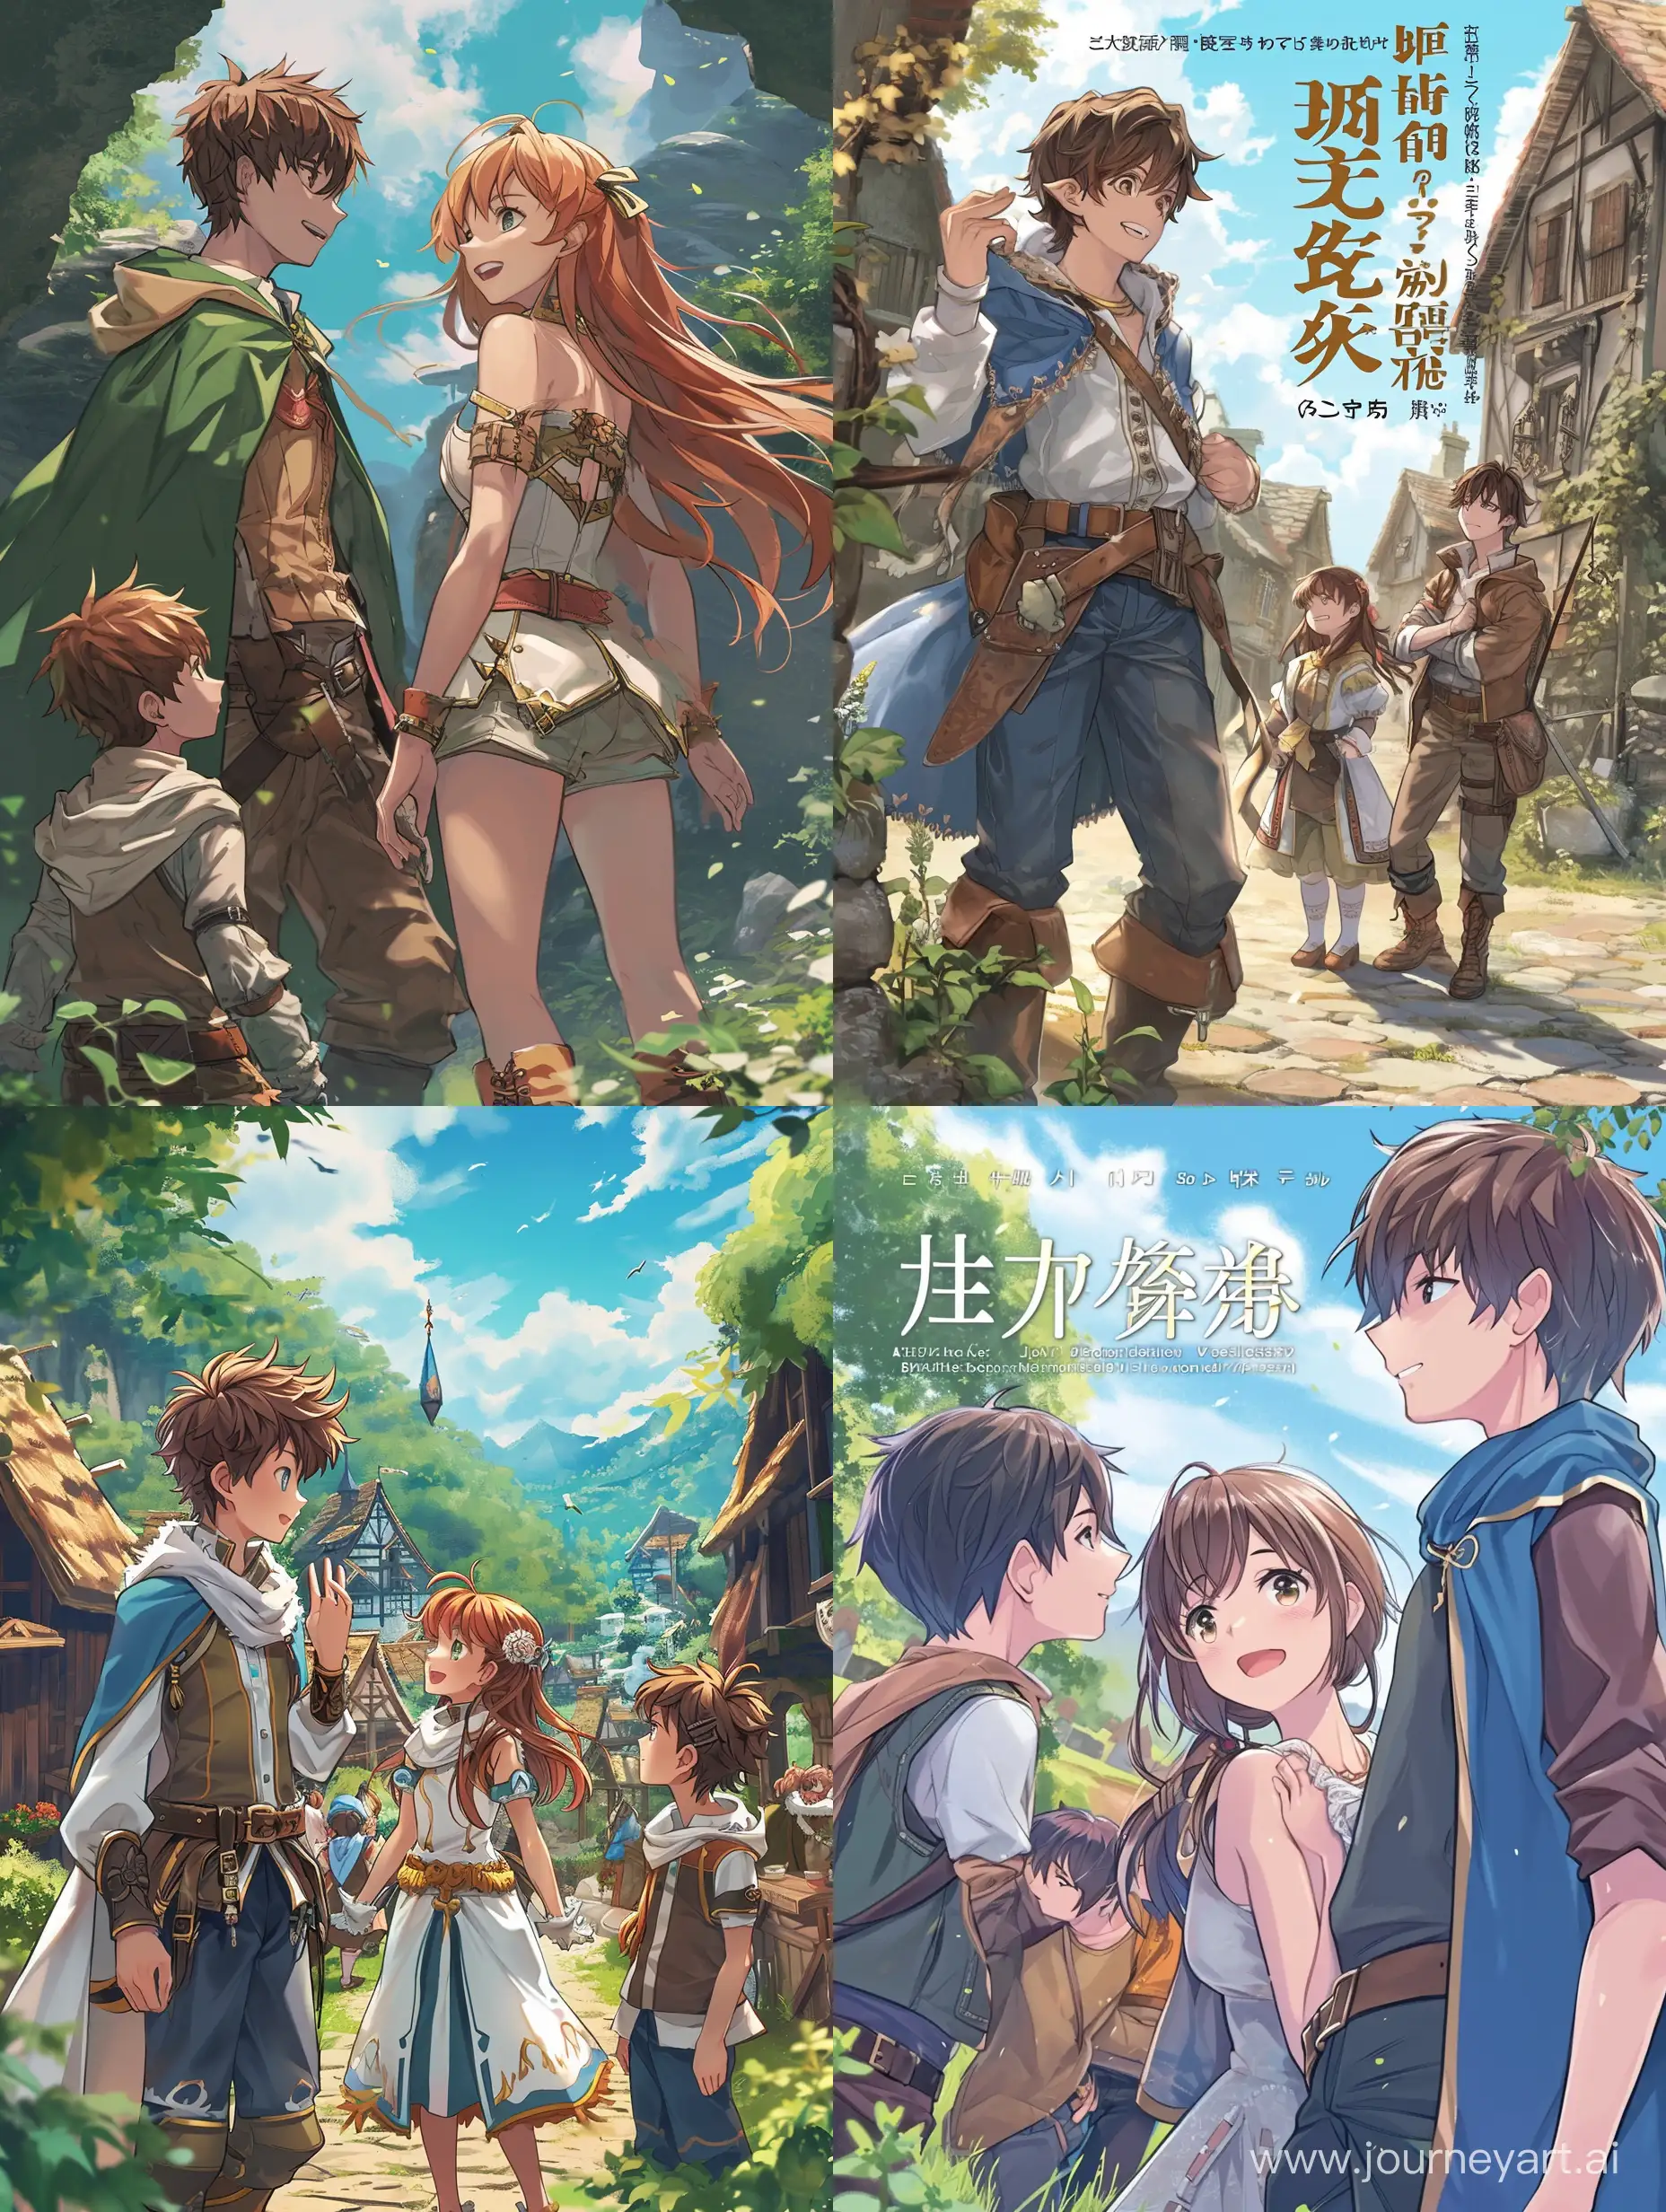 Fantasy-World-Light-Novel-Cover-with-Boy-and-Girl